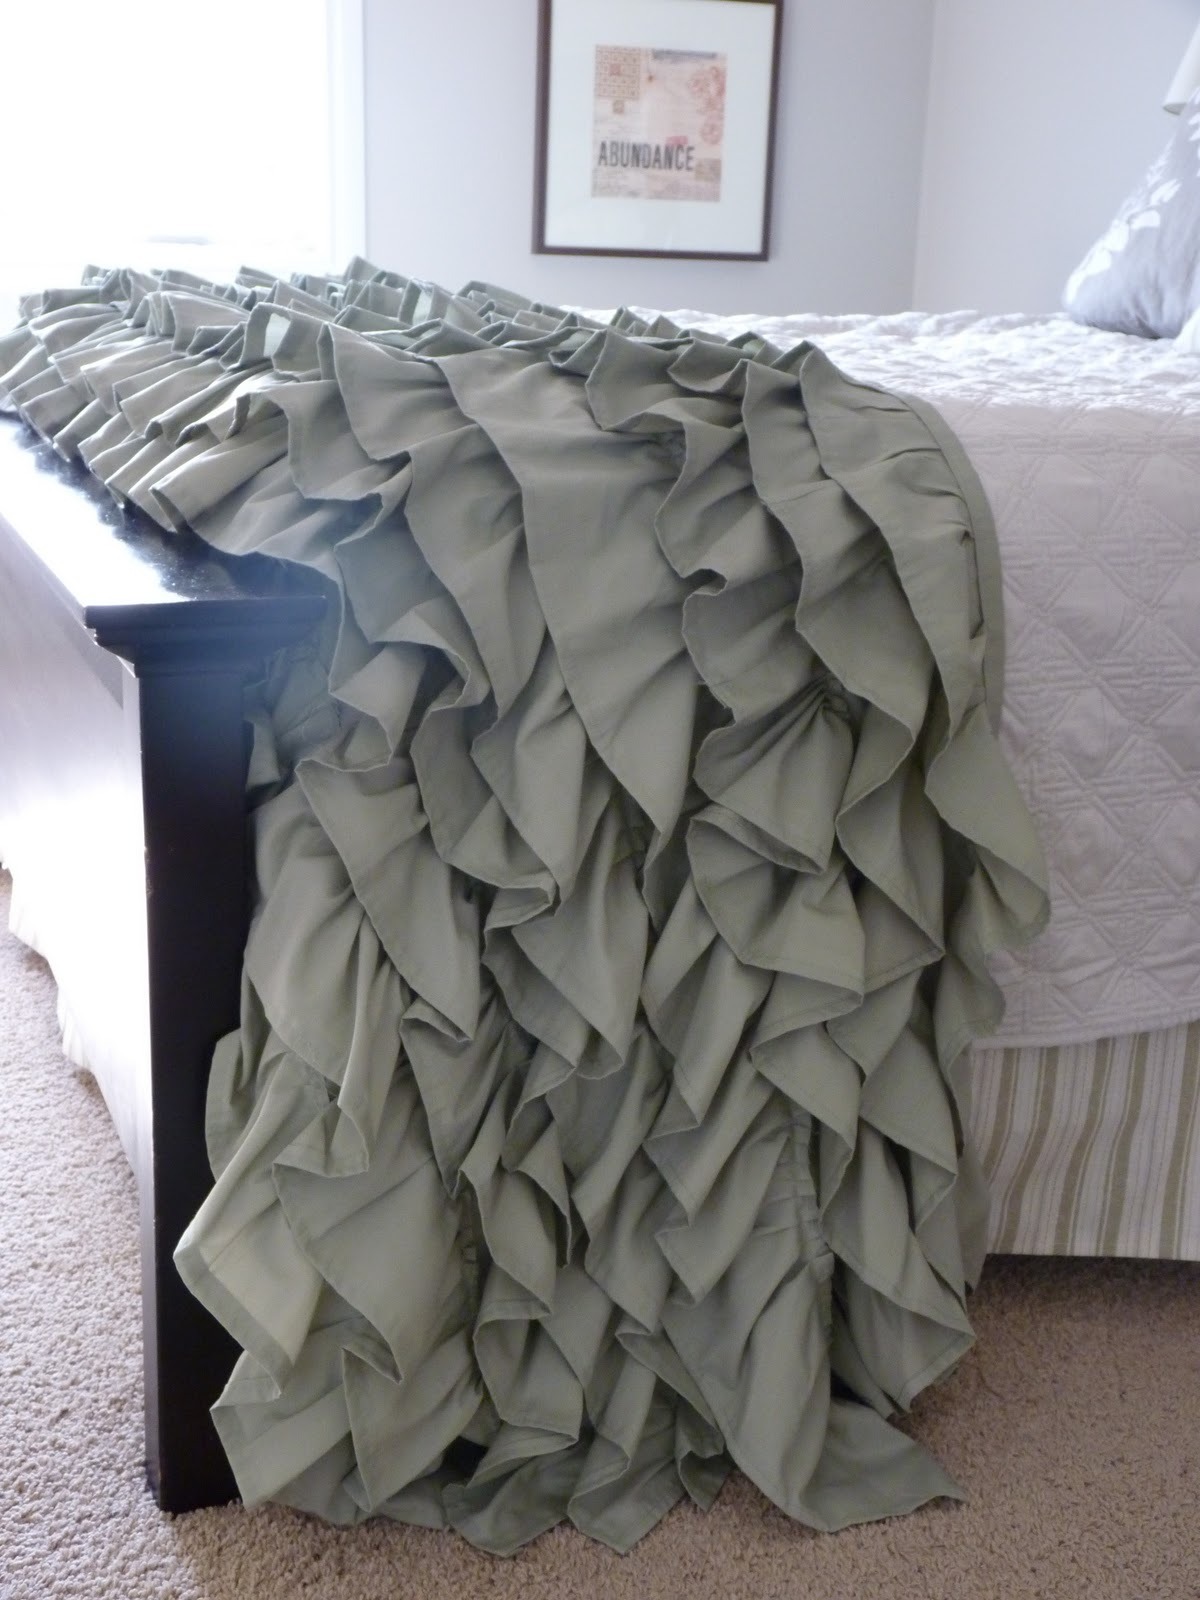 Ruffled Throw | DIY Design
I quite often find DIYs that I have to make ASAP - this is one of them. But not for me - for my mum. This is something she would love. Actually I would like to make it for myself too! It takes a little time to make but the...